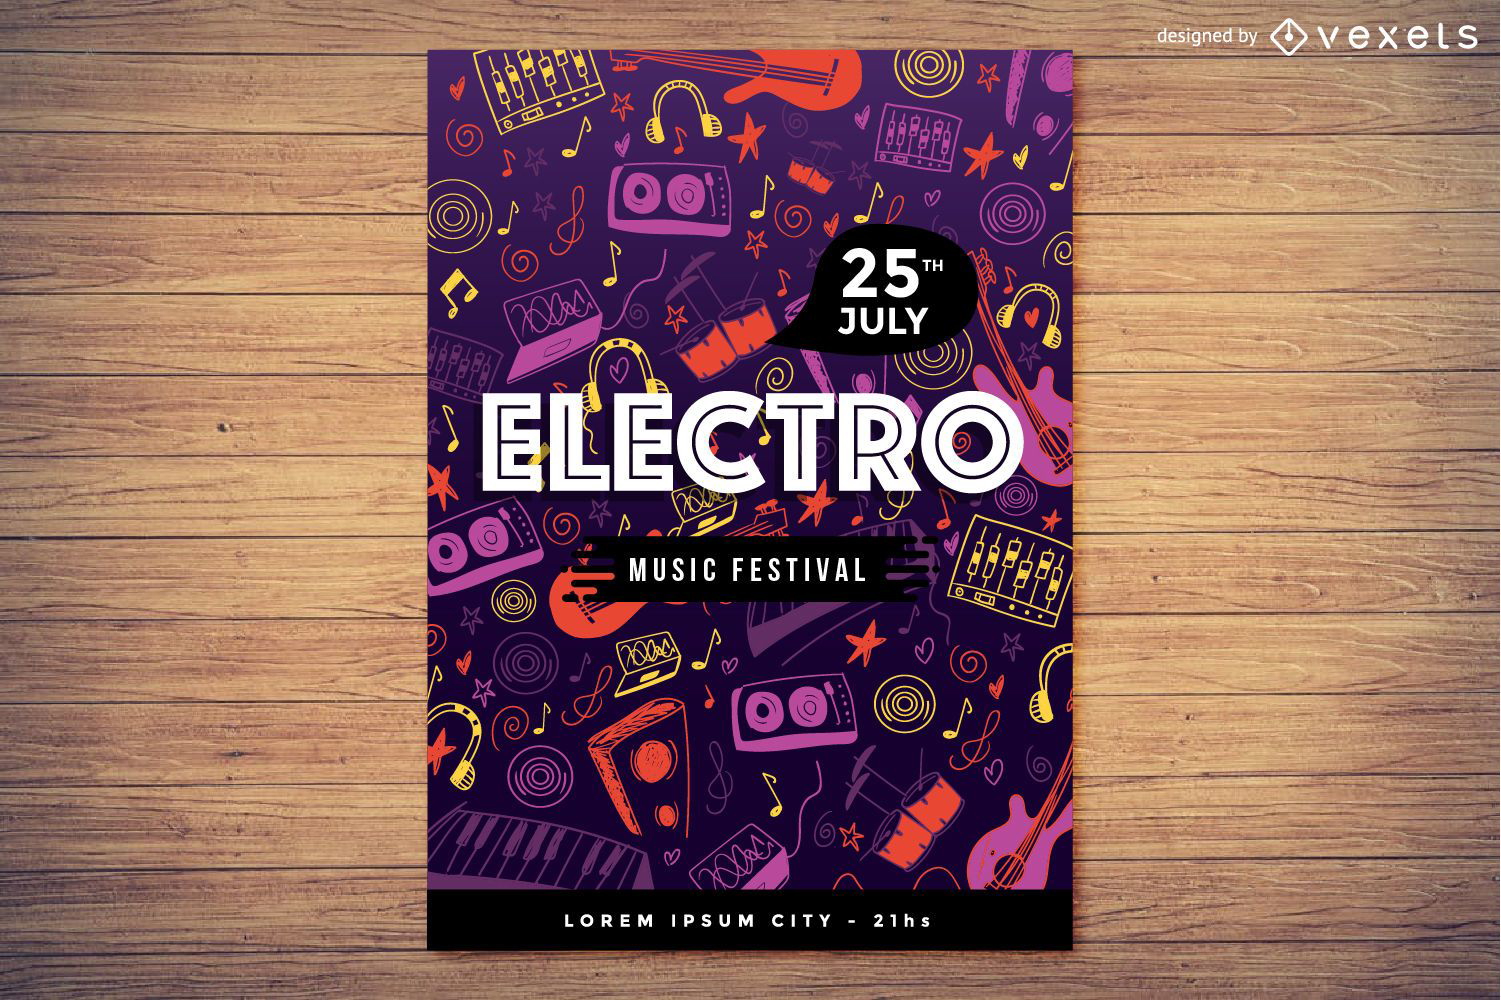 Electro music party poster design